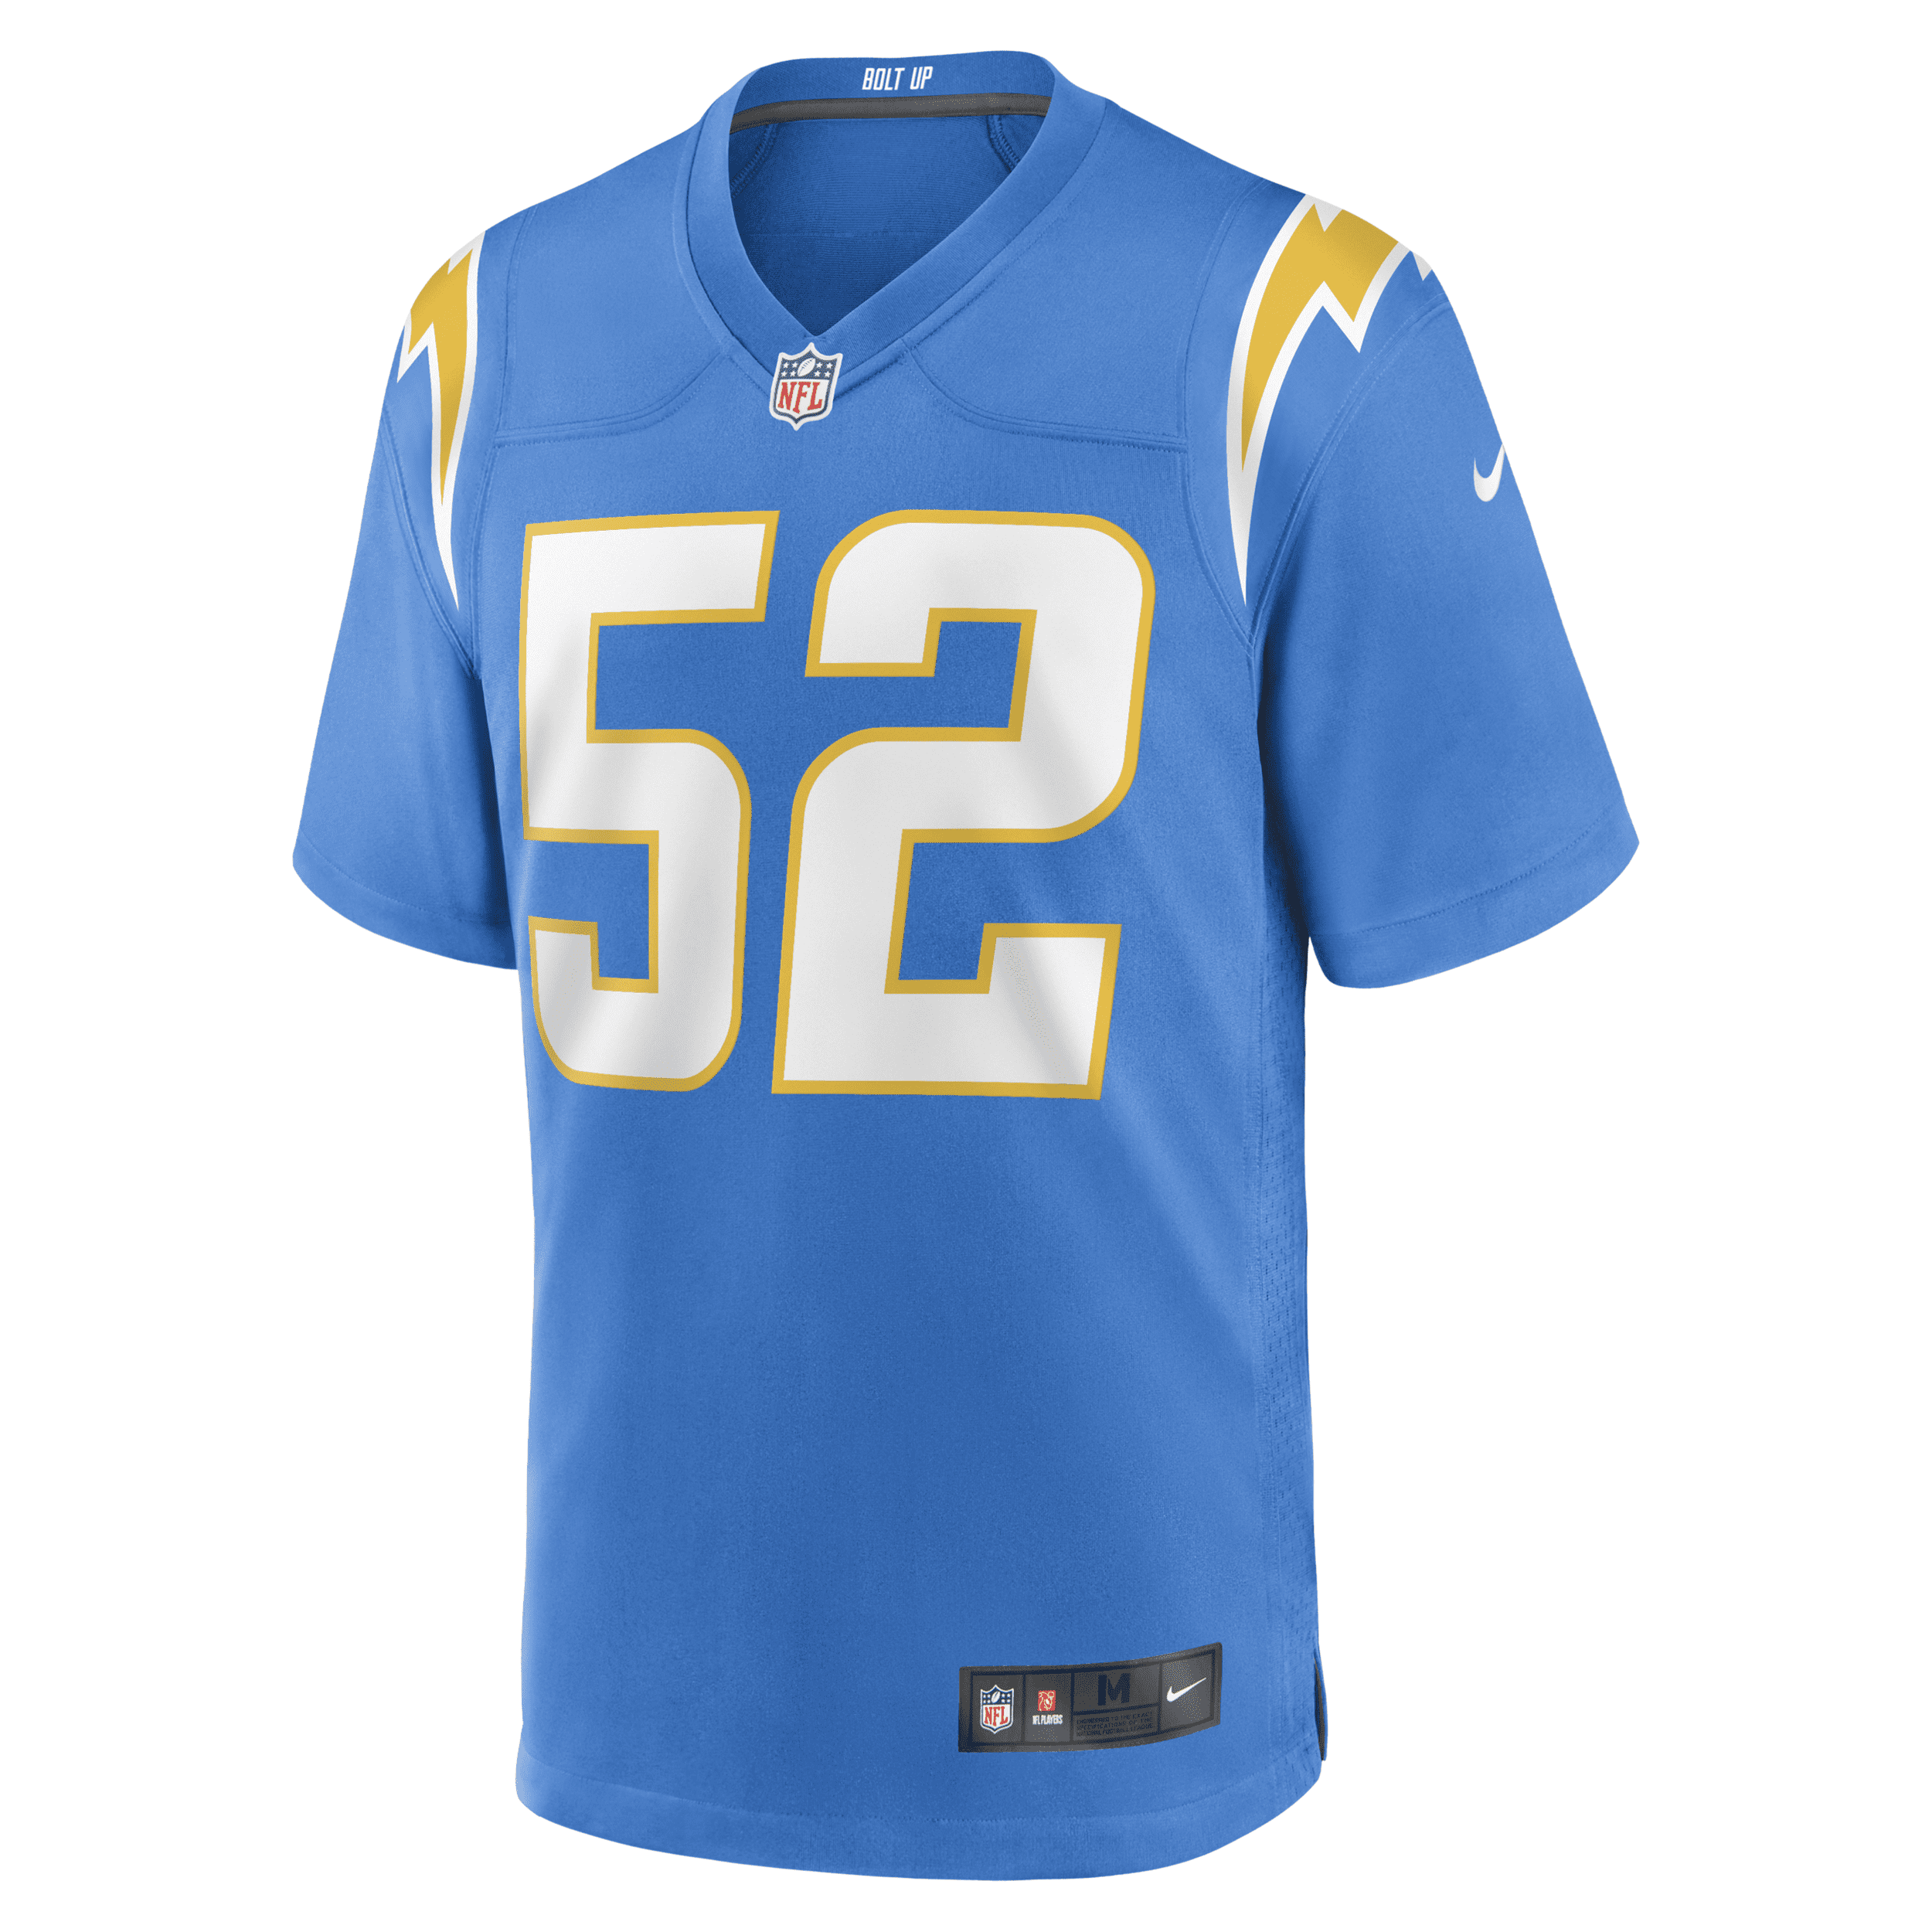 NIKE MEN'S NFL LOS ANGELES CHARGERS (KHALIL MACK) GAME FOOTBALL JERSEY,1009082207